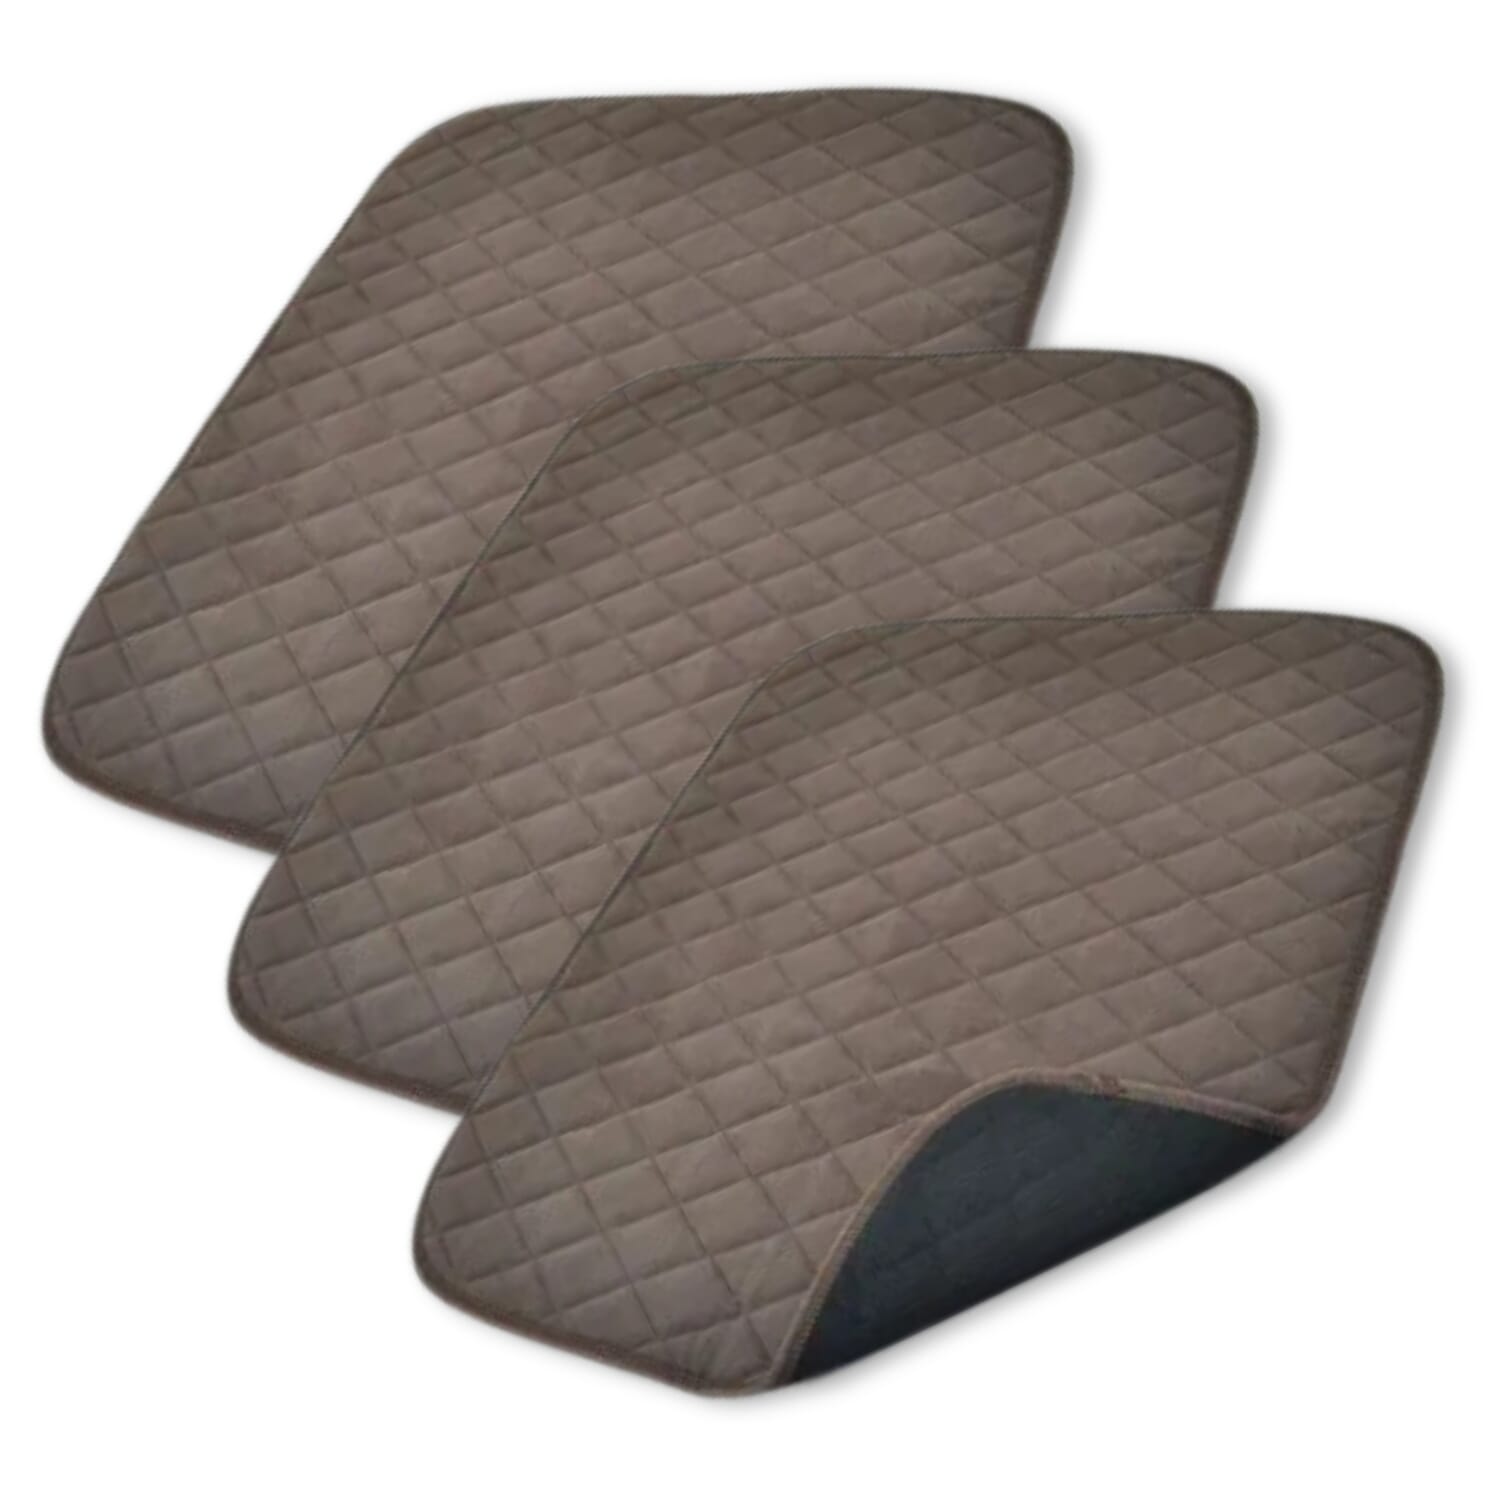 View Vida Washable Chair Pad Brown Pack of 3 information